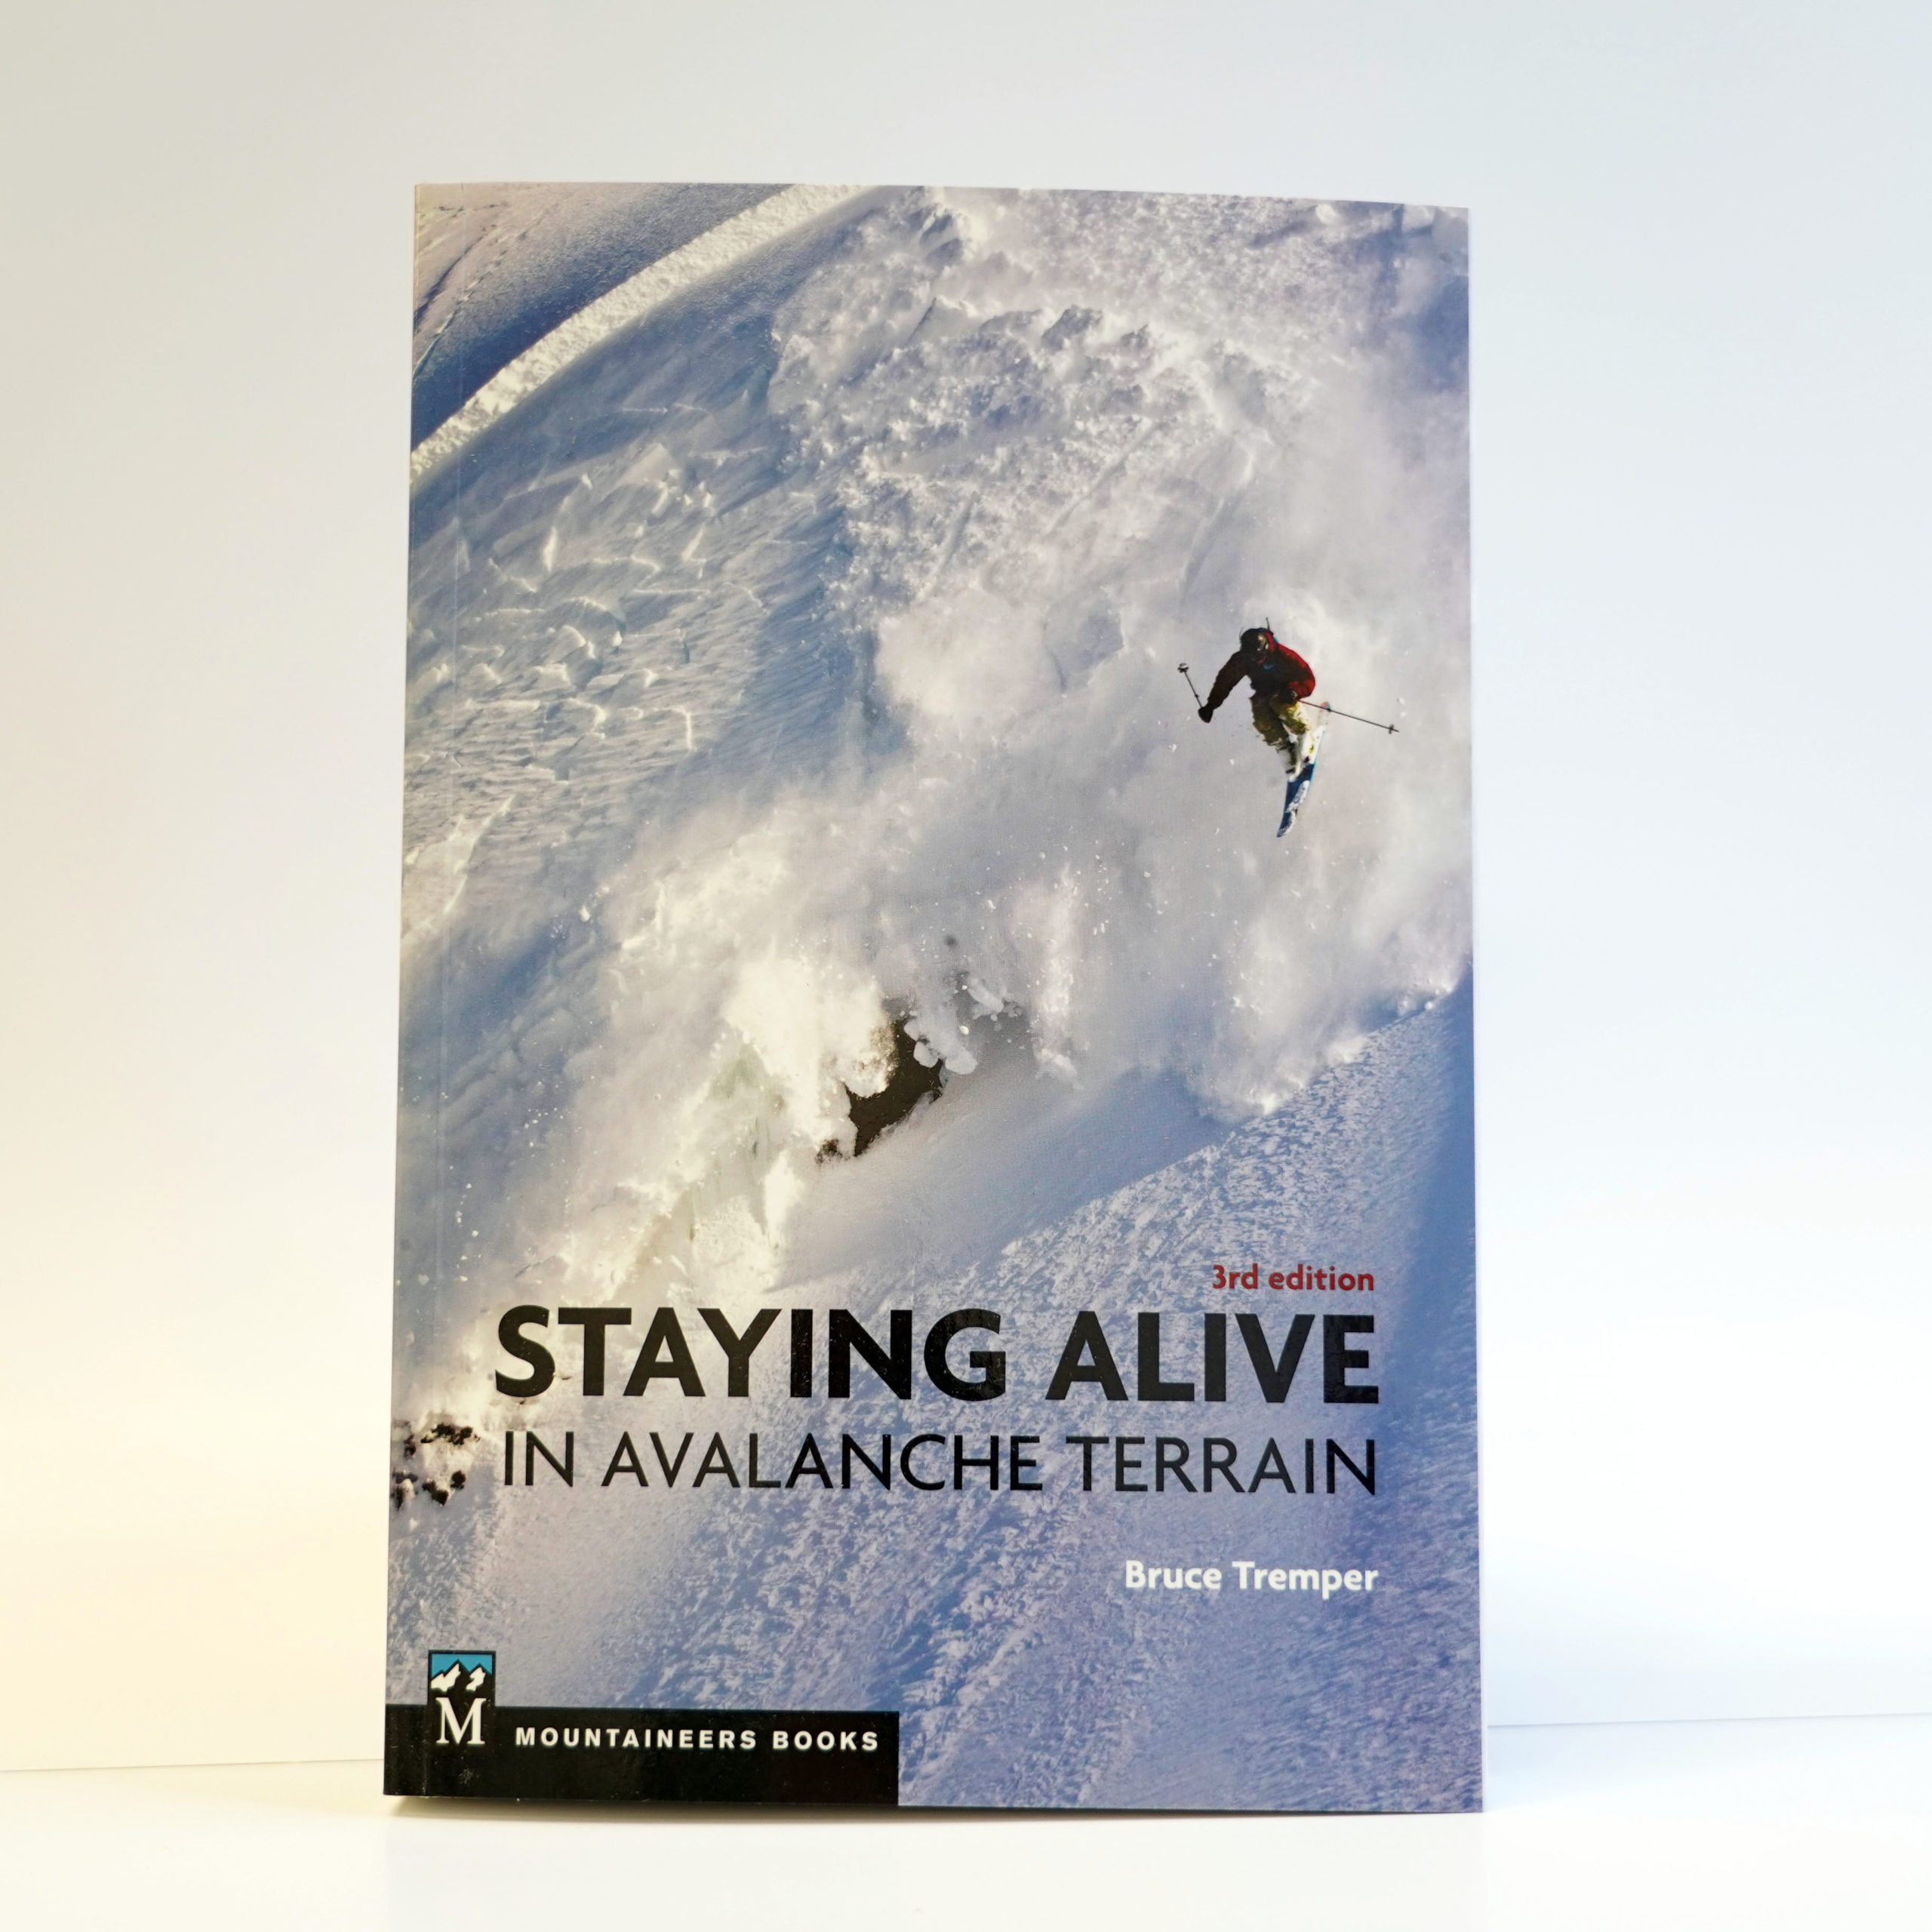 Staying_alive_avalanche_terrain_3rdedition